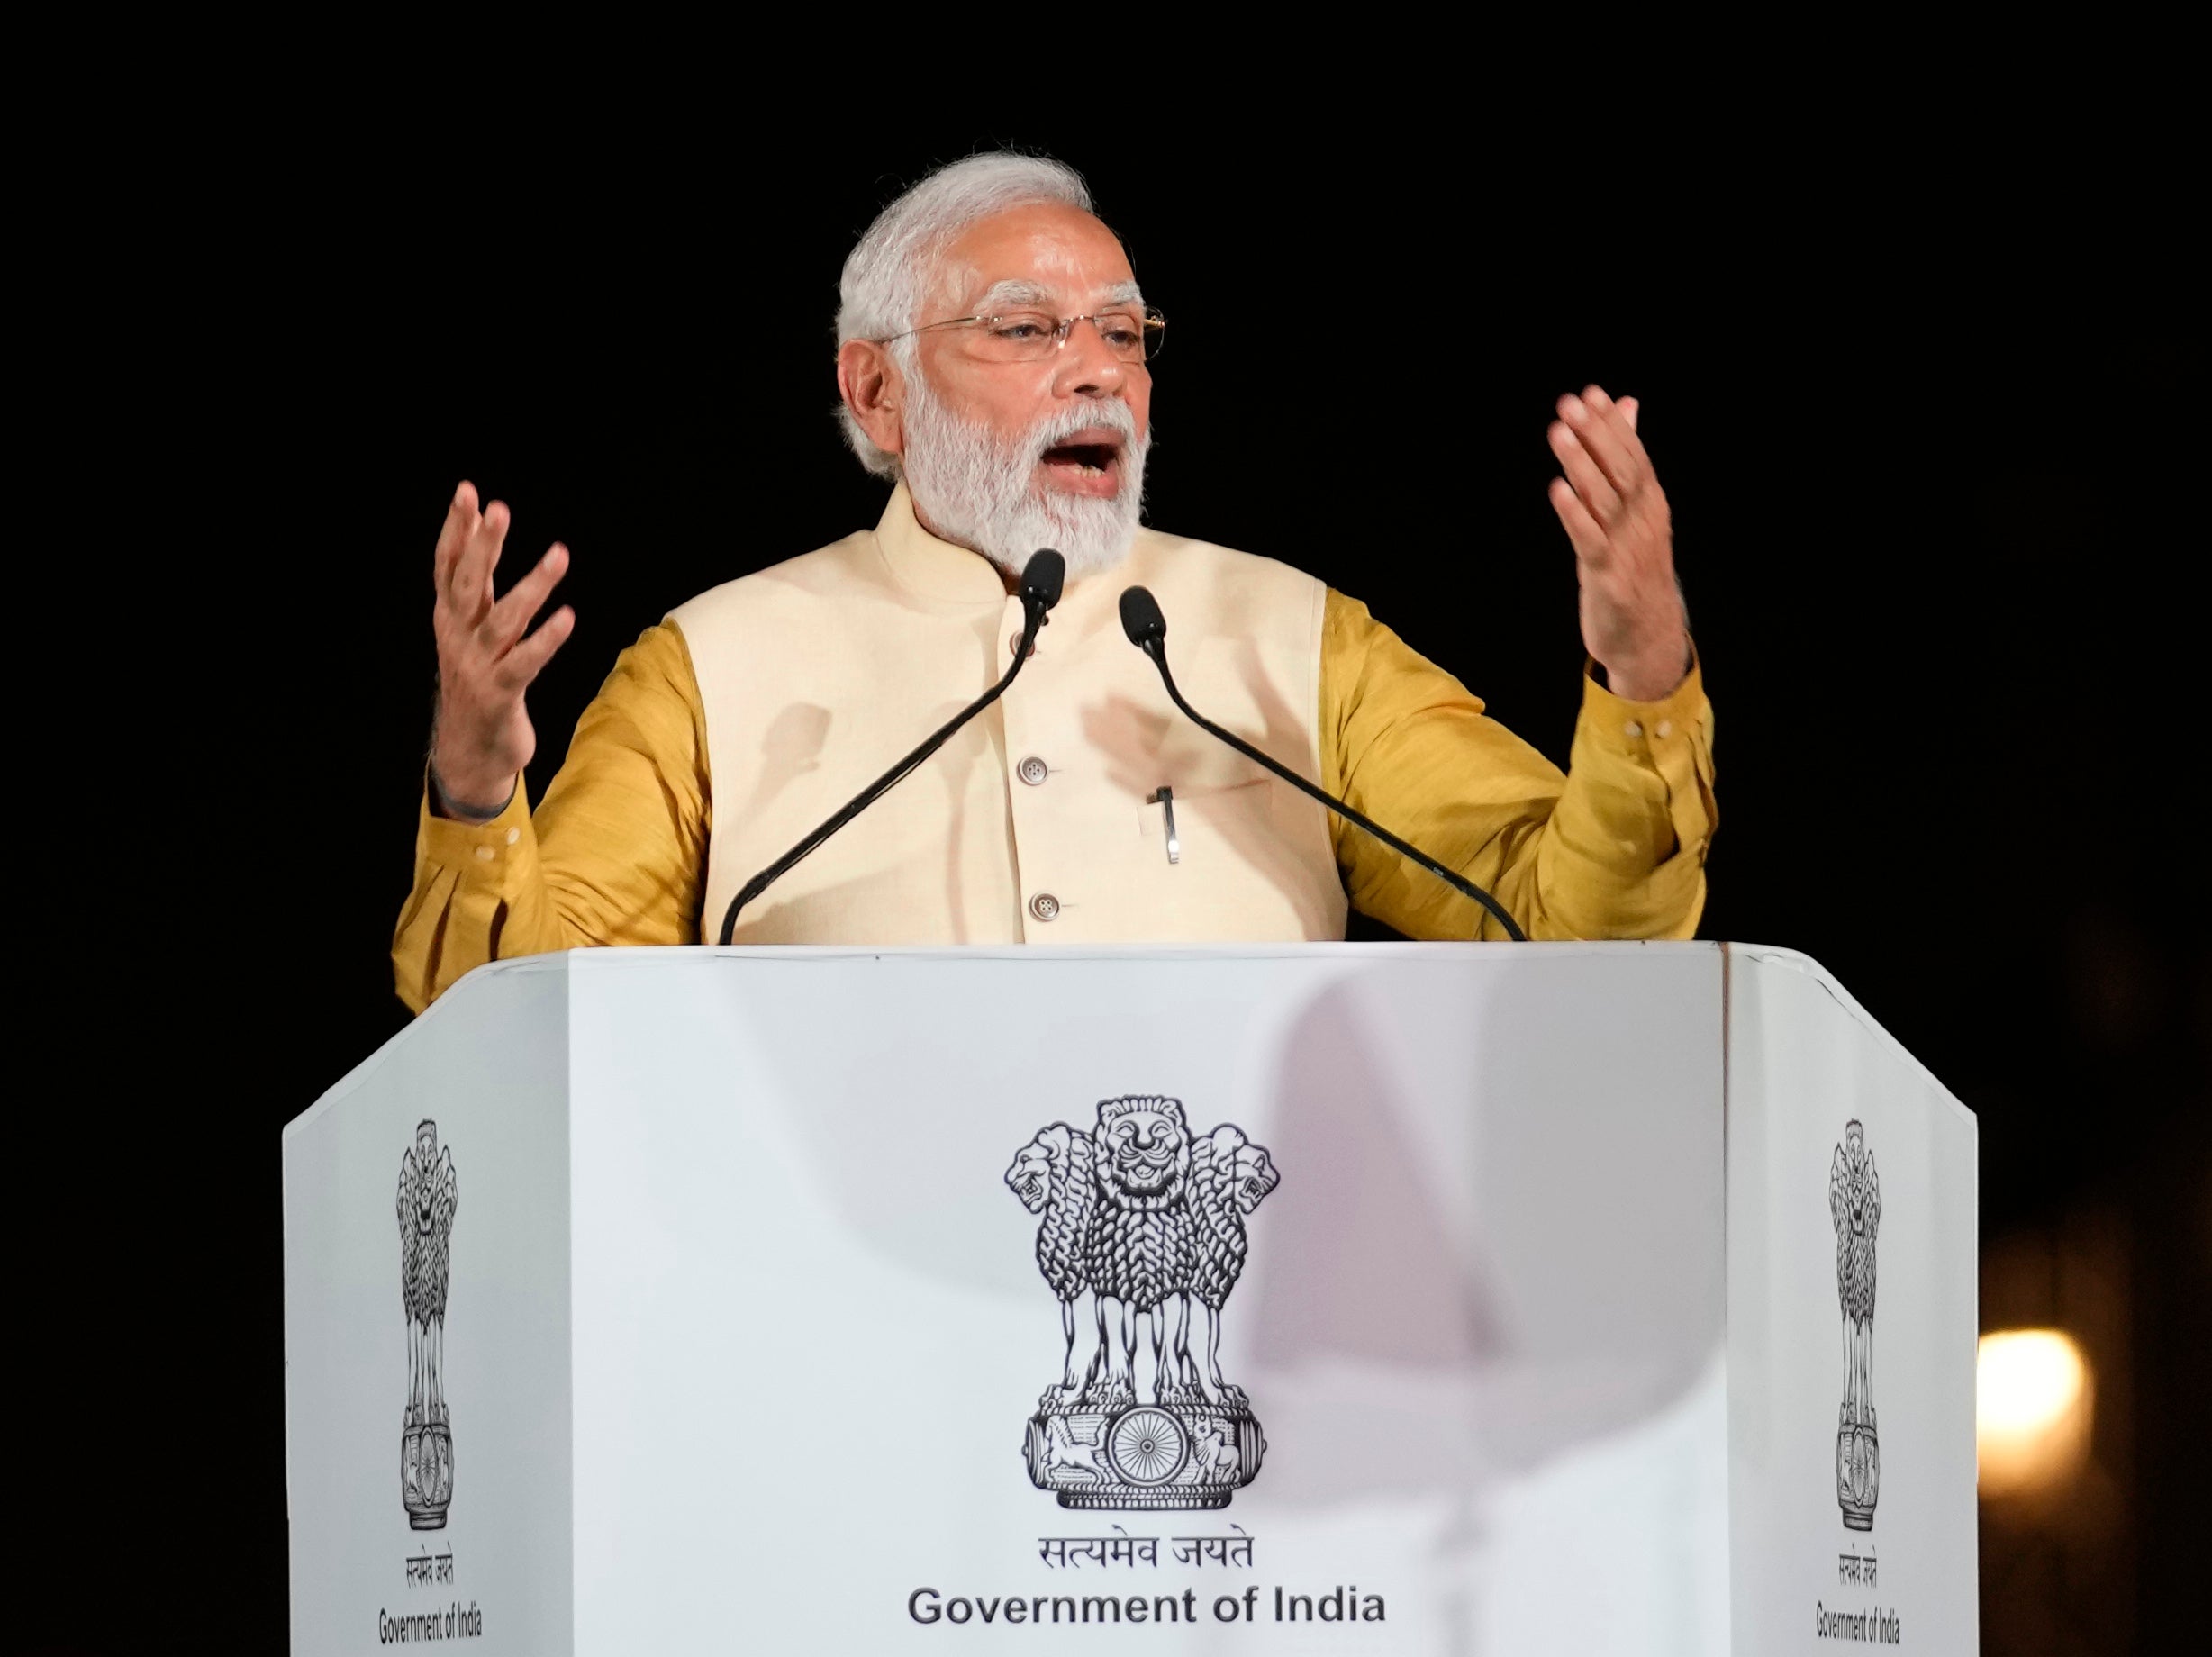 Calls have been made to suspend talks with Indian prime minister Narendra Modi’s government